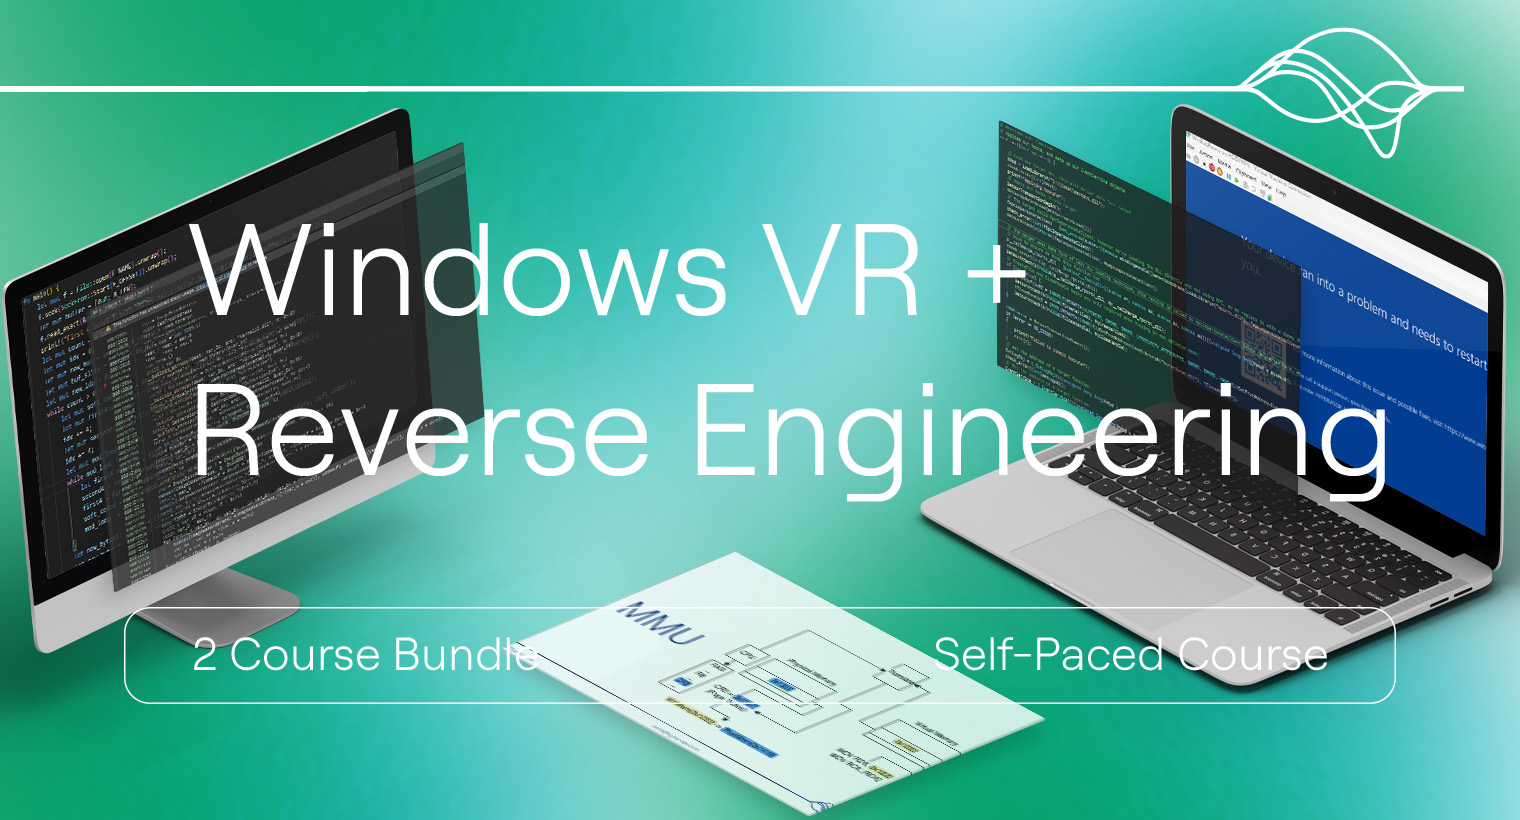 Windows VR + Reverse Engineering Bundle | Signal Labs | Advanced Offensive Cybersecurity Training | Self-Paced Trainings | Live Trainings | Virtual Trainings | Custom Private Trainings for Business